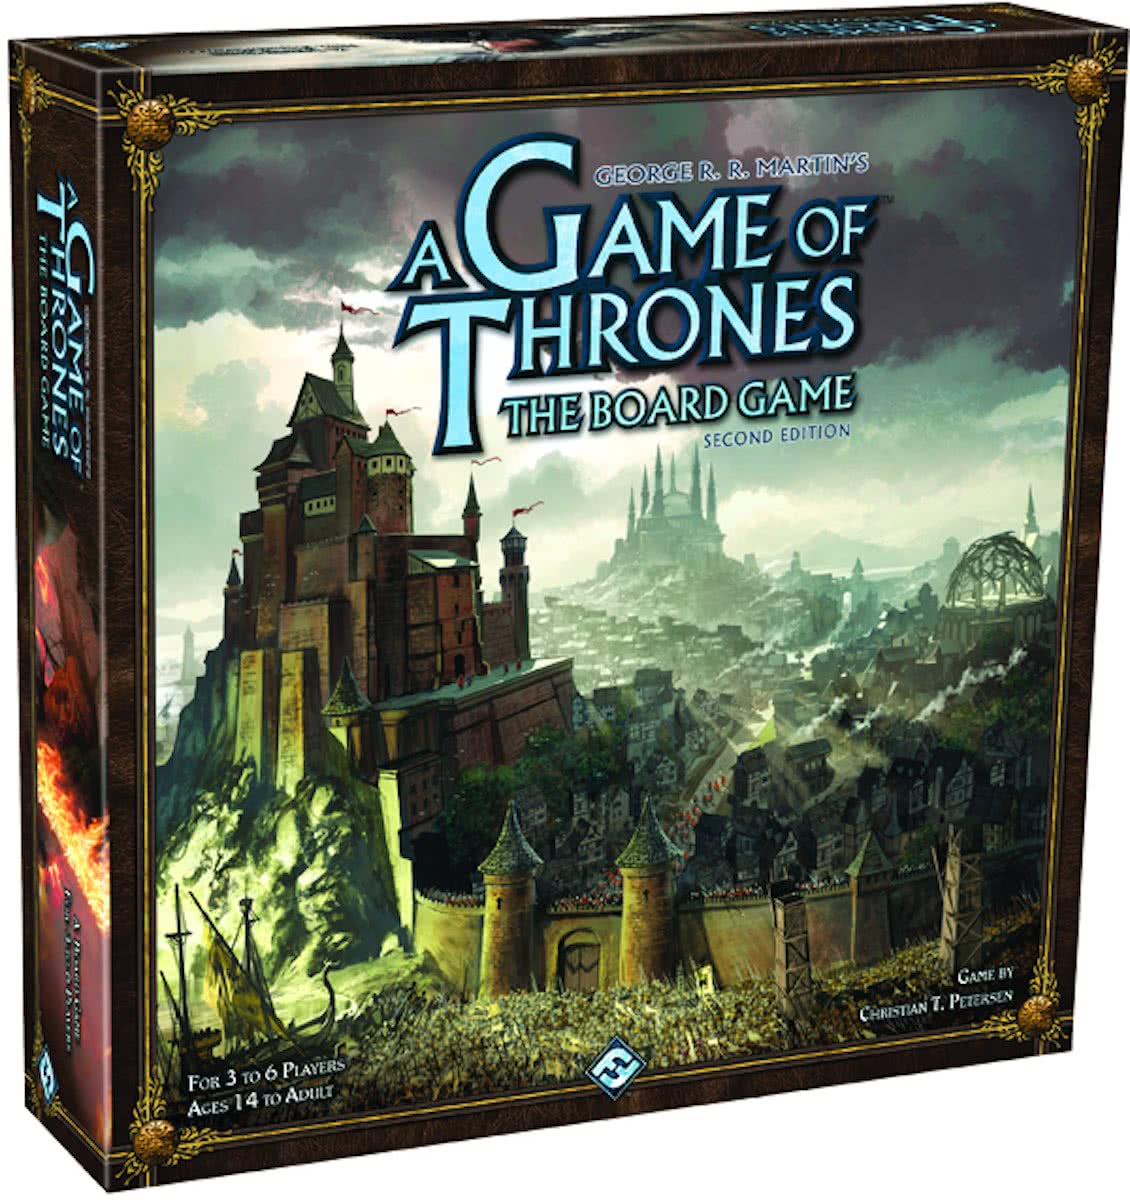 A Game of Thrones: The Board Game (Second Edition) description reviews